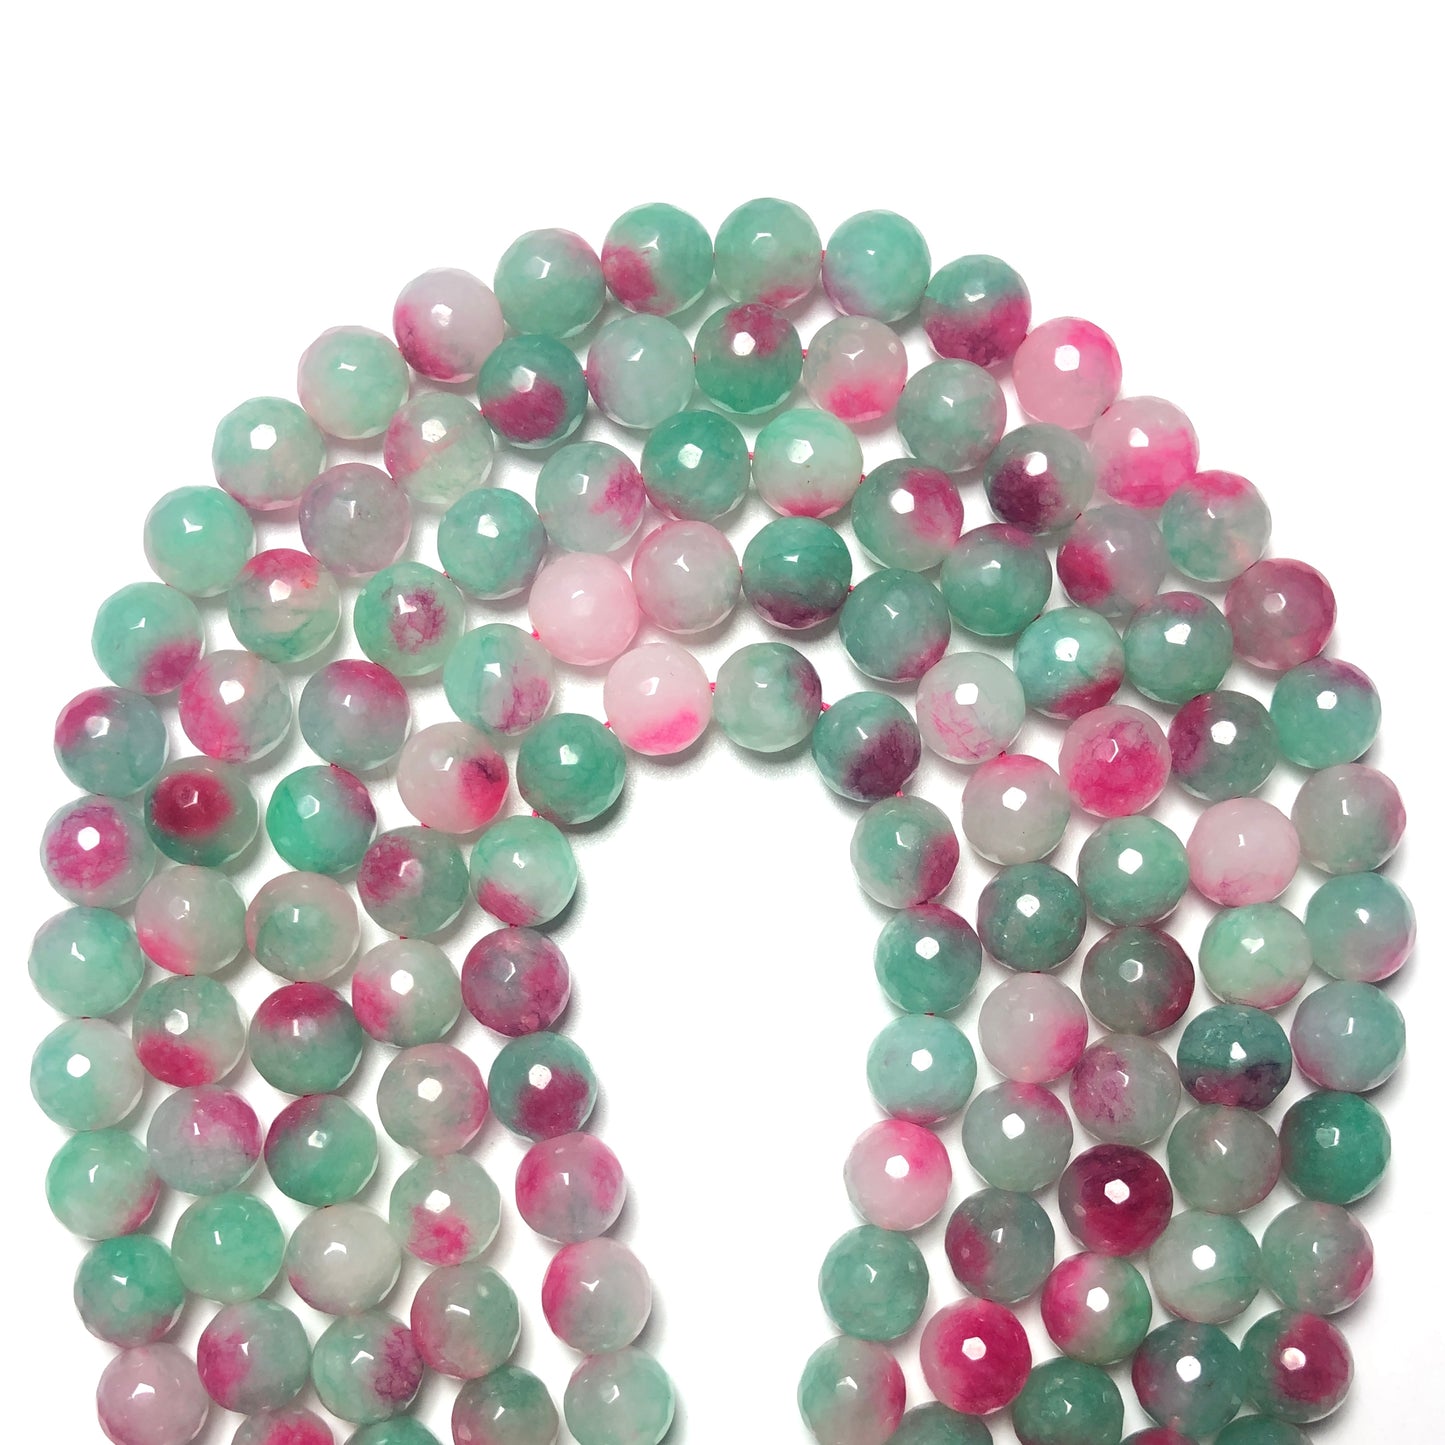 2 Strands/lot 10mm Pink Green Faceted Jade Stone Beads Stone Beads Faceted Jade Beads New Beads Arrivals Charms Beads Beyond